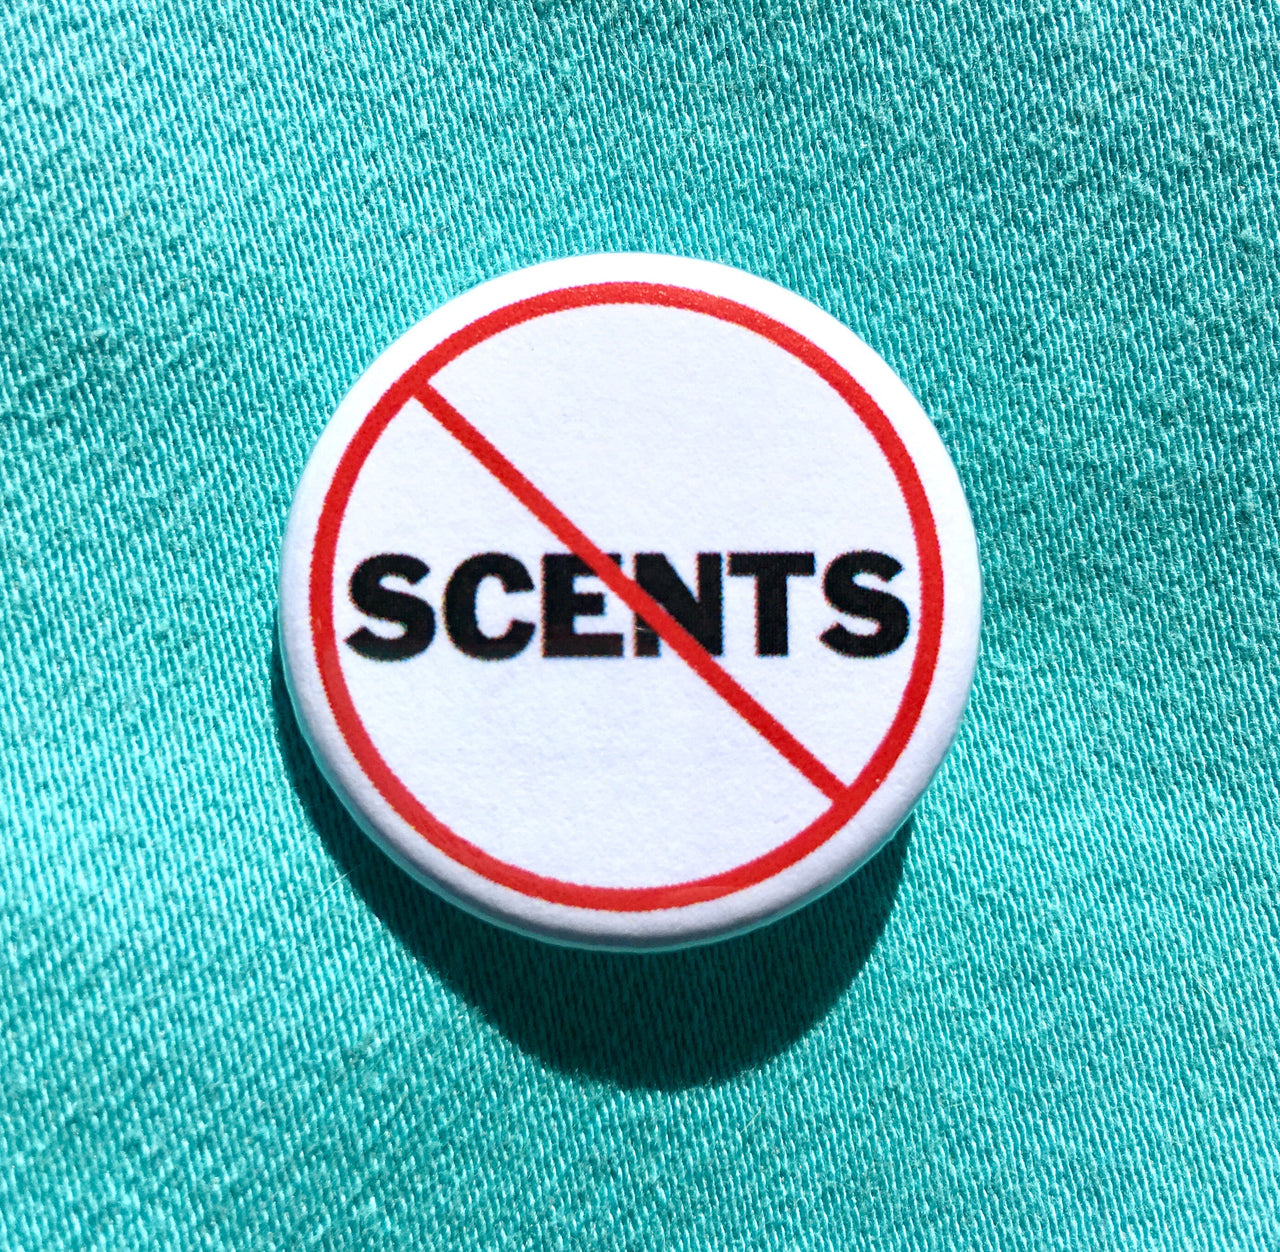 Scent-free zone - Radical Buttons